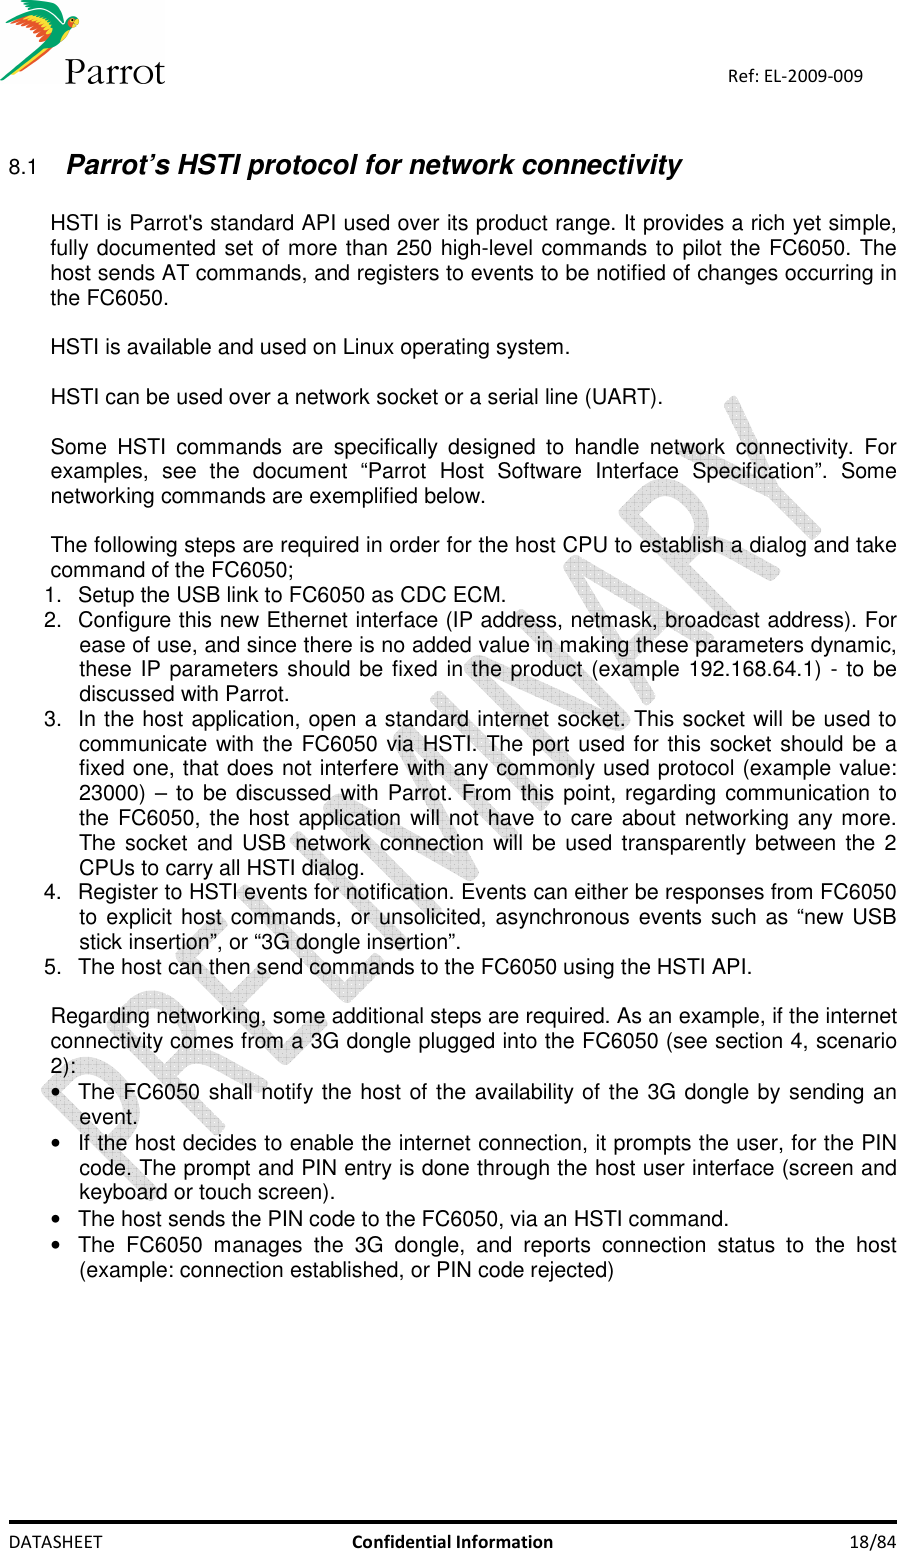    DATASHEET  Confidential Information  18/84 Ref: EL-2009-009  8.1 Parrot’s HSTI protocol for network connectivity  HSTI is Parrot&apos;s standard API used over its product range. It provides a rich yet simple, fully documented set of more than 250 high-level commands to pilot the FC6050. The host sends AT commands, and registers to events to be notified of changes occurring in the FC6050.  HSTI is available and used on Linux operating system.   HSTI can be used over a network socket or a serial line (UART).  Some  HSTI  commands  are  specifically  designed  to  handle  network  connectivity.  For examples,  see  the  document  “Parrot  Host  Software  Interface  Specification”.  Some networking commands are exemplified below.  The following steps are required in order for the host CPU to establish a dialog and take command of the FC6050; 1.  Setup the USB link to FC6050 as CDC ECM. 2.  Configure this new Ethernet interface (IP address, netmask, broadcast address). For ease of use, and since there is no added value in making these parameters dynamic, these IP parameters should be fixed in the product (example 192.168.64.1) - to be discussed with Parrot. 3.  In the host application, open a standard internet socket. This socket will be used to communicate with the FC6050 via HSTI. The port used for this socket should be a fixed one, that does not interfere with any commonly used protocol (example value: 23000) – to  be  discussed with Parrot. From this point, regarding communication to the FC6050, the host application will not have  to care about networking any more. The socket  and USB network connection will be used transparently between the  2 CPUs to carry all HSTI dialog. 4.  Register to HSTI events for notification. Events can either be responses from FC6050 to explicit host  commands, or unsolicited, asynchronous events such as “new USB stick insertion”, or “3G dongle insertion”. 5.  The host can then send commands to the FC6050 using the HSTI API.  Regarding networking, some additional steps are required. As an example, if the internet connectivity comes from a 3G dongle plugged into the FC6050 (see section 4, scenario 2): •  The FC6050 shall notify the host of the availability of the 3G dongle by sending an event. •  If the host decides to enable the internet connection, it prompts the user, for the PIN code. The prompt and PIN entry is done through the host user interface (screen and keyboard or touch screen). •  The host sends the PIN code to the FC6050, via an HSTI command. •  The  FC6050  manages  the  3G  dongle,  and  reports  connection  status  to  the  host (example: connection established, or PIN code rejected)         